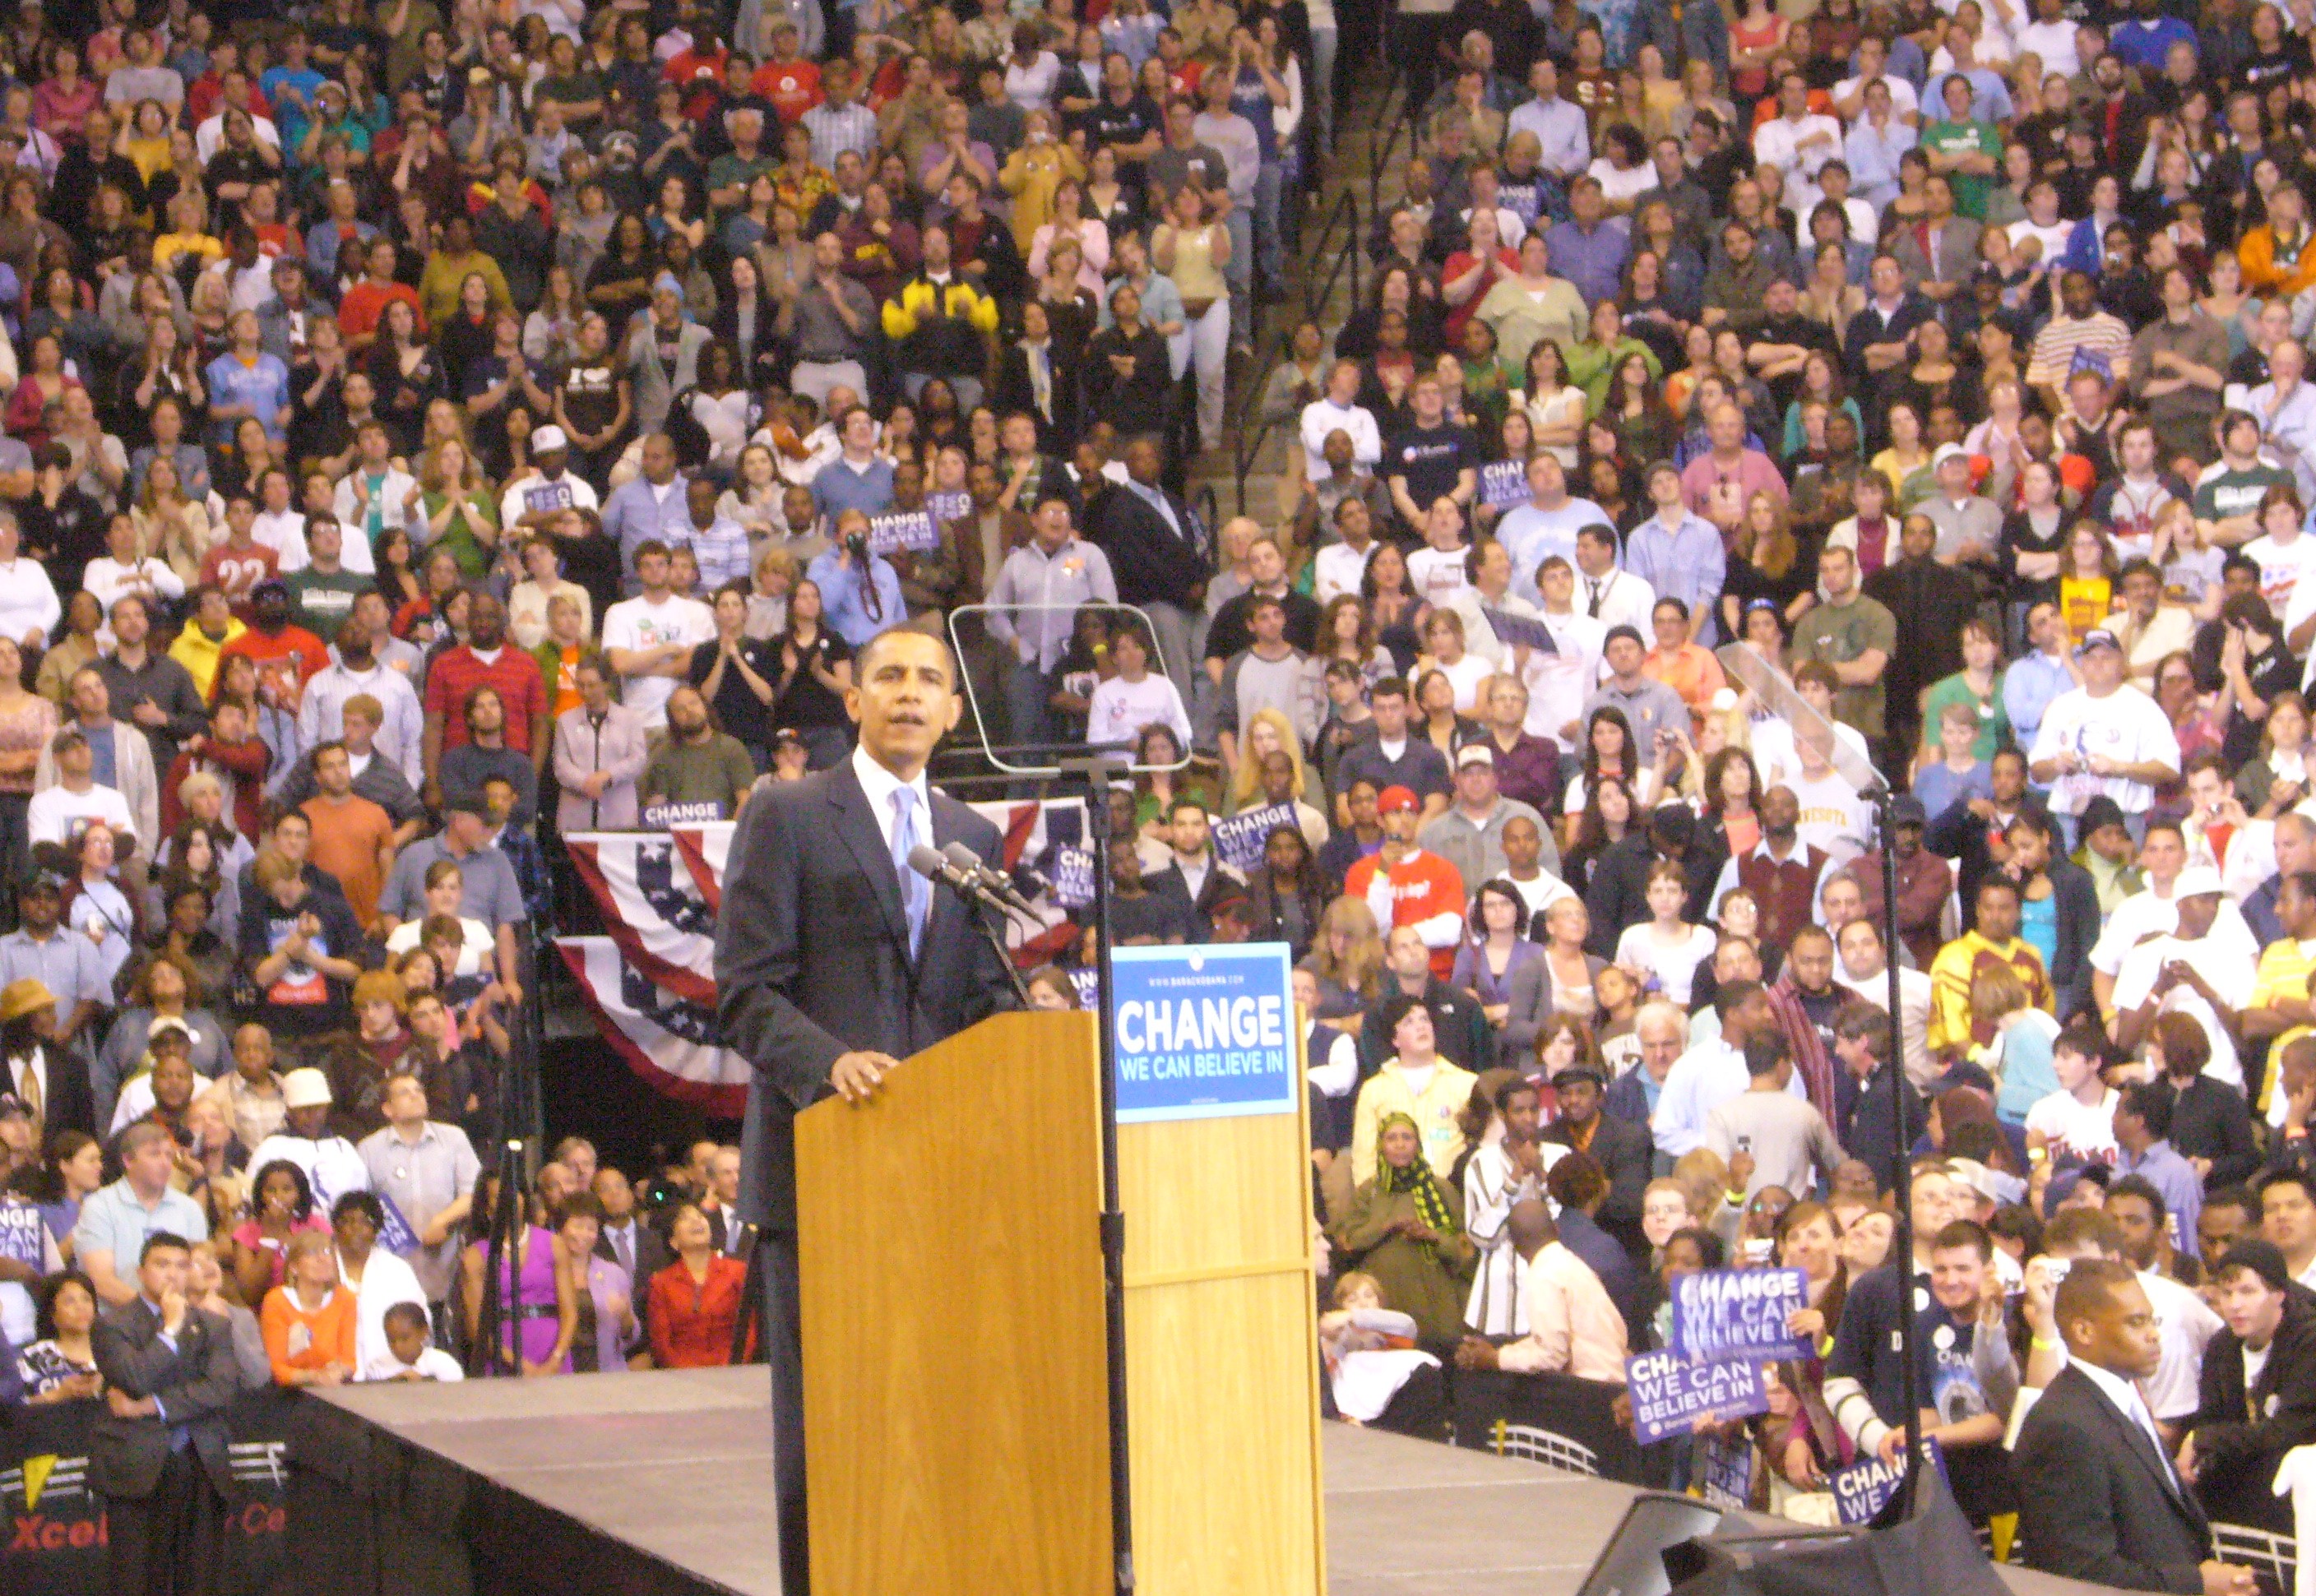 A man speaking at a podium with "change we need" banners in front of a large, diverse audience at an indoor arena.